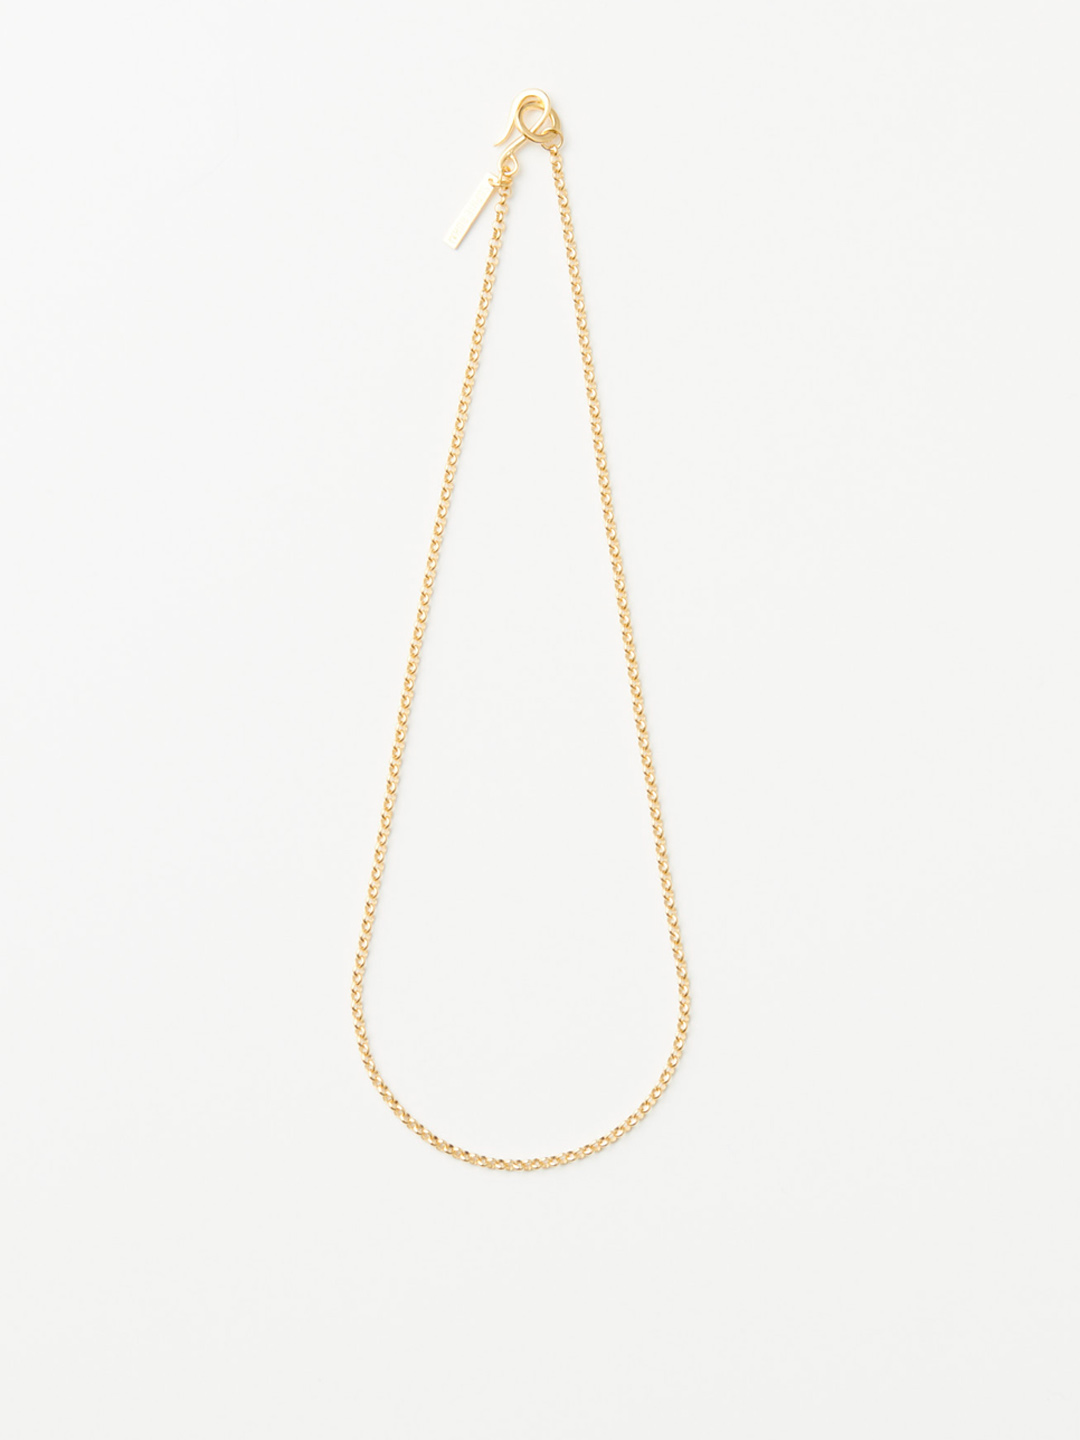 Nage Chain Necklace 40cm - Gold